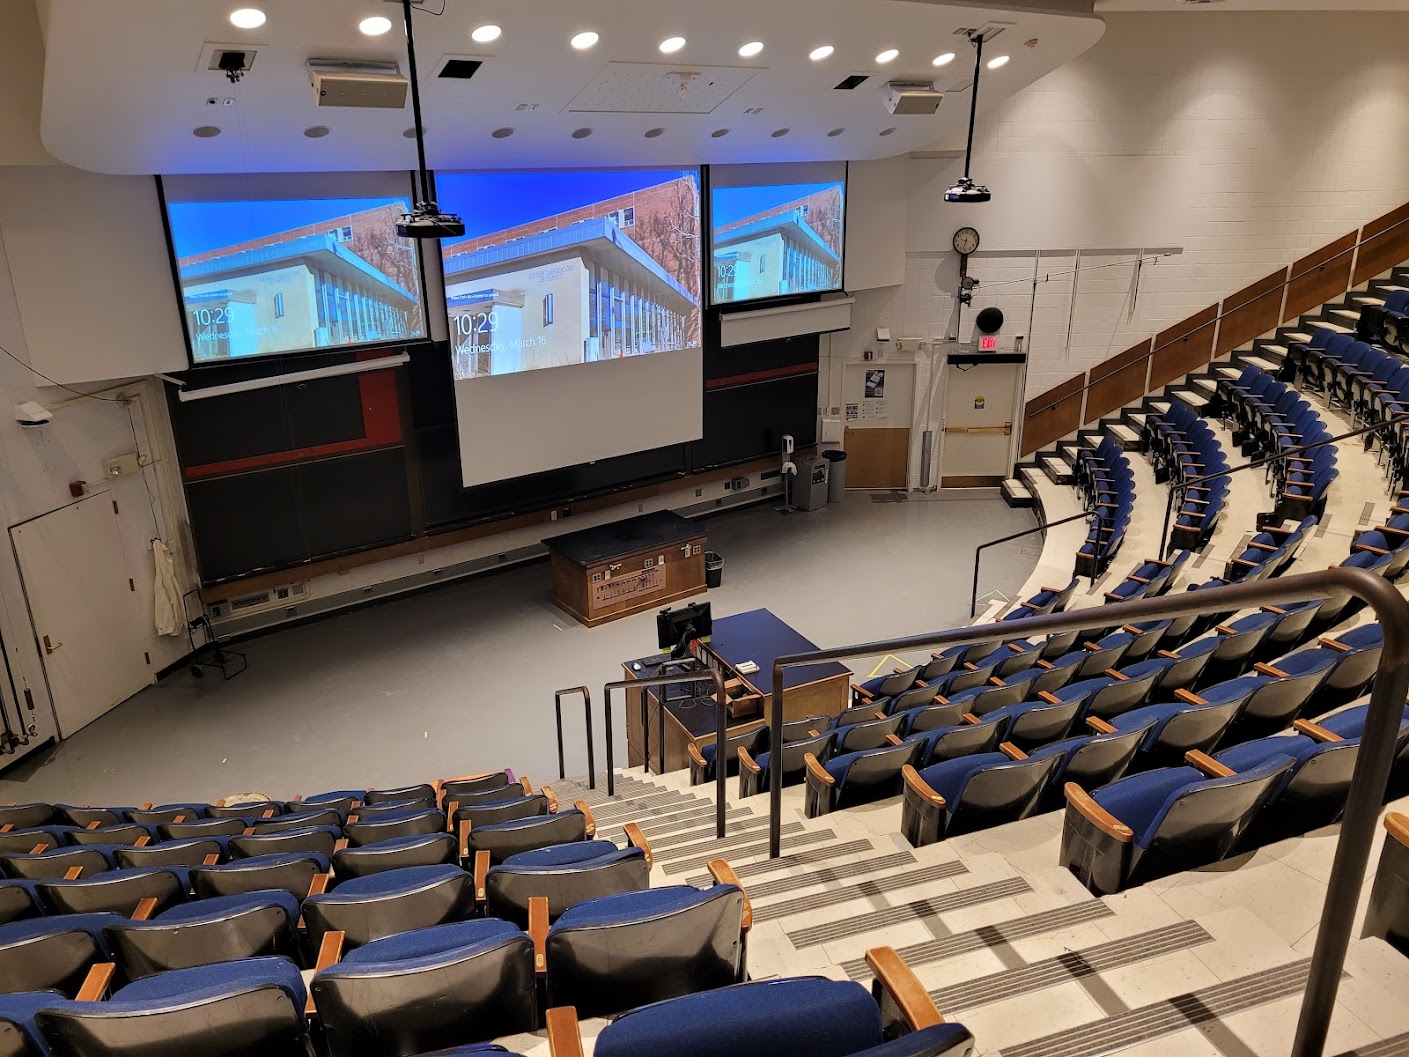 A view of the classroom with theater auditorium seating, chalk boards, projection screens, and instructor cabinet in front.